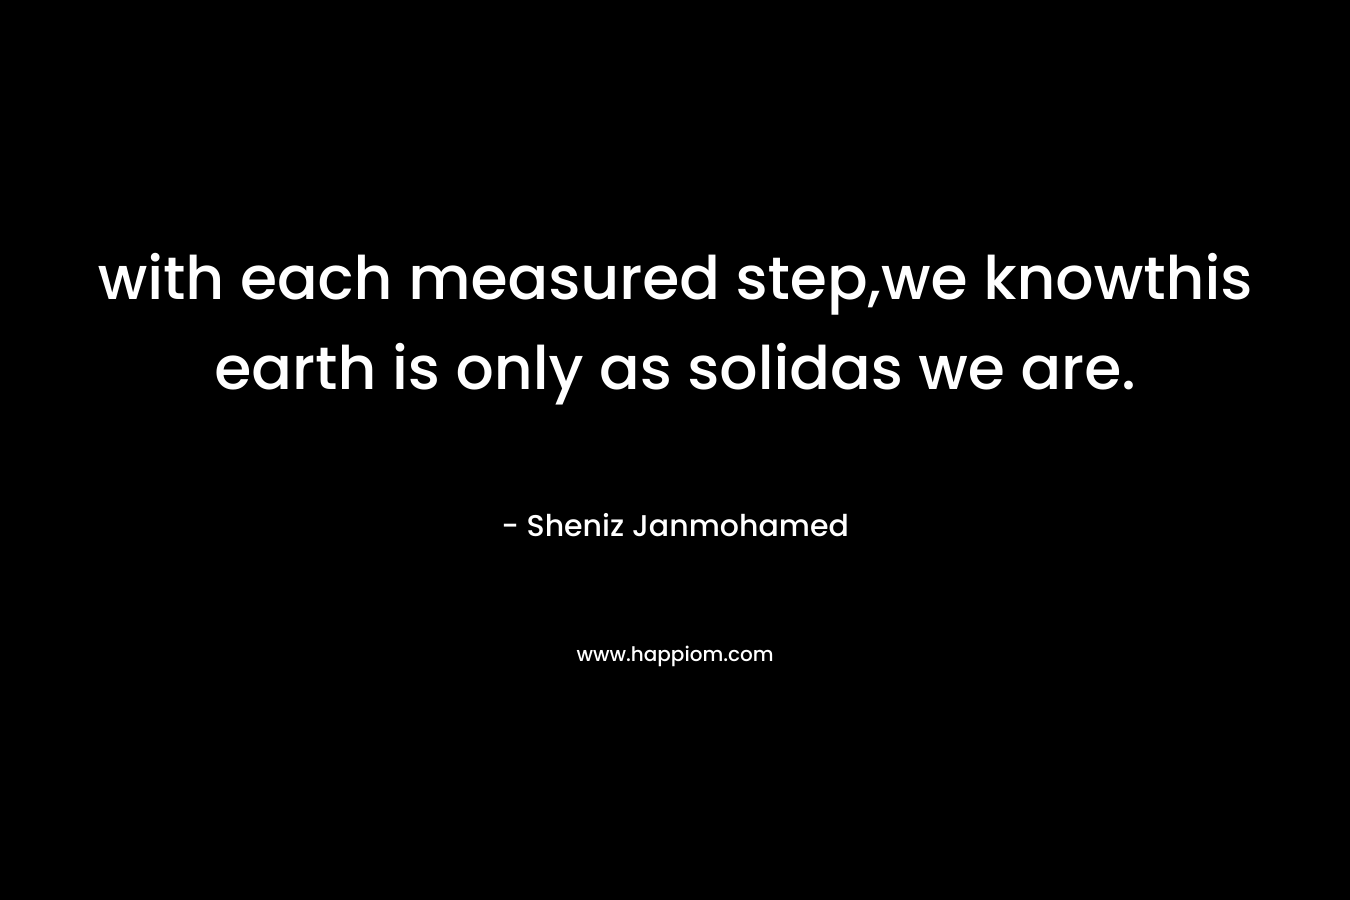 with each measured step,we knowthis earth is only as solidas we are.